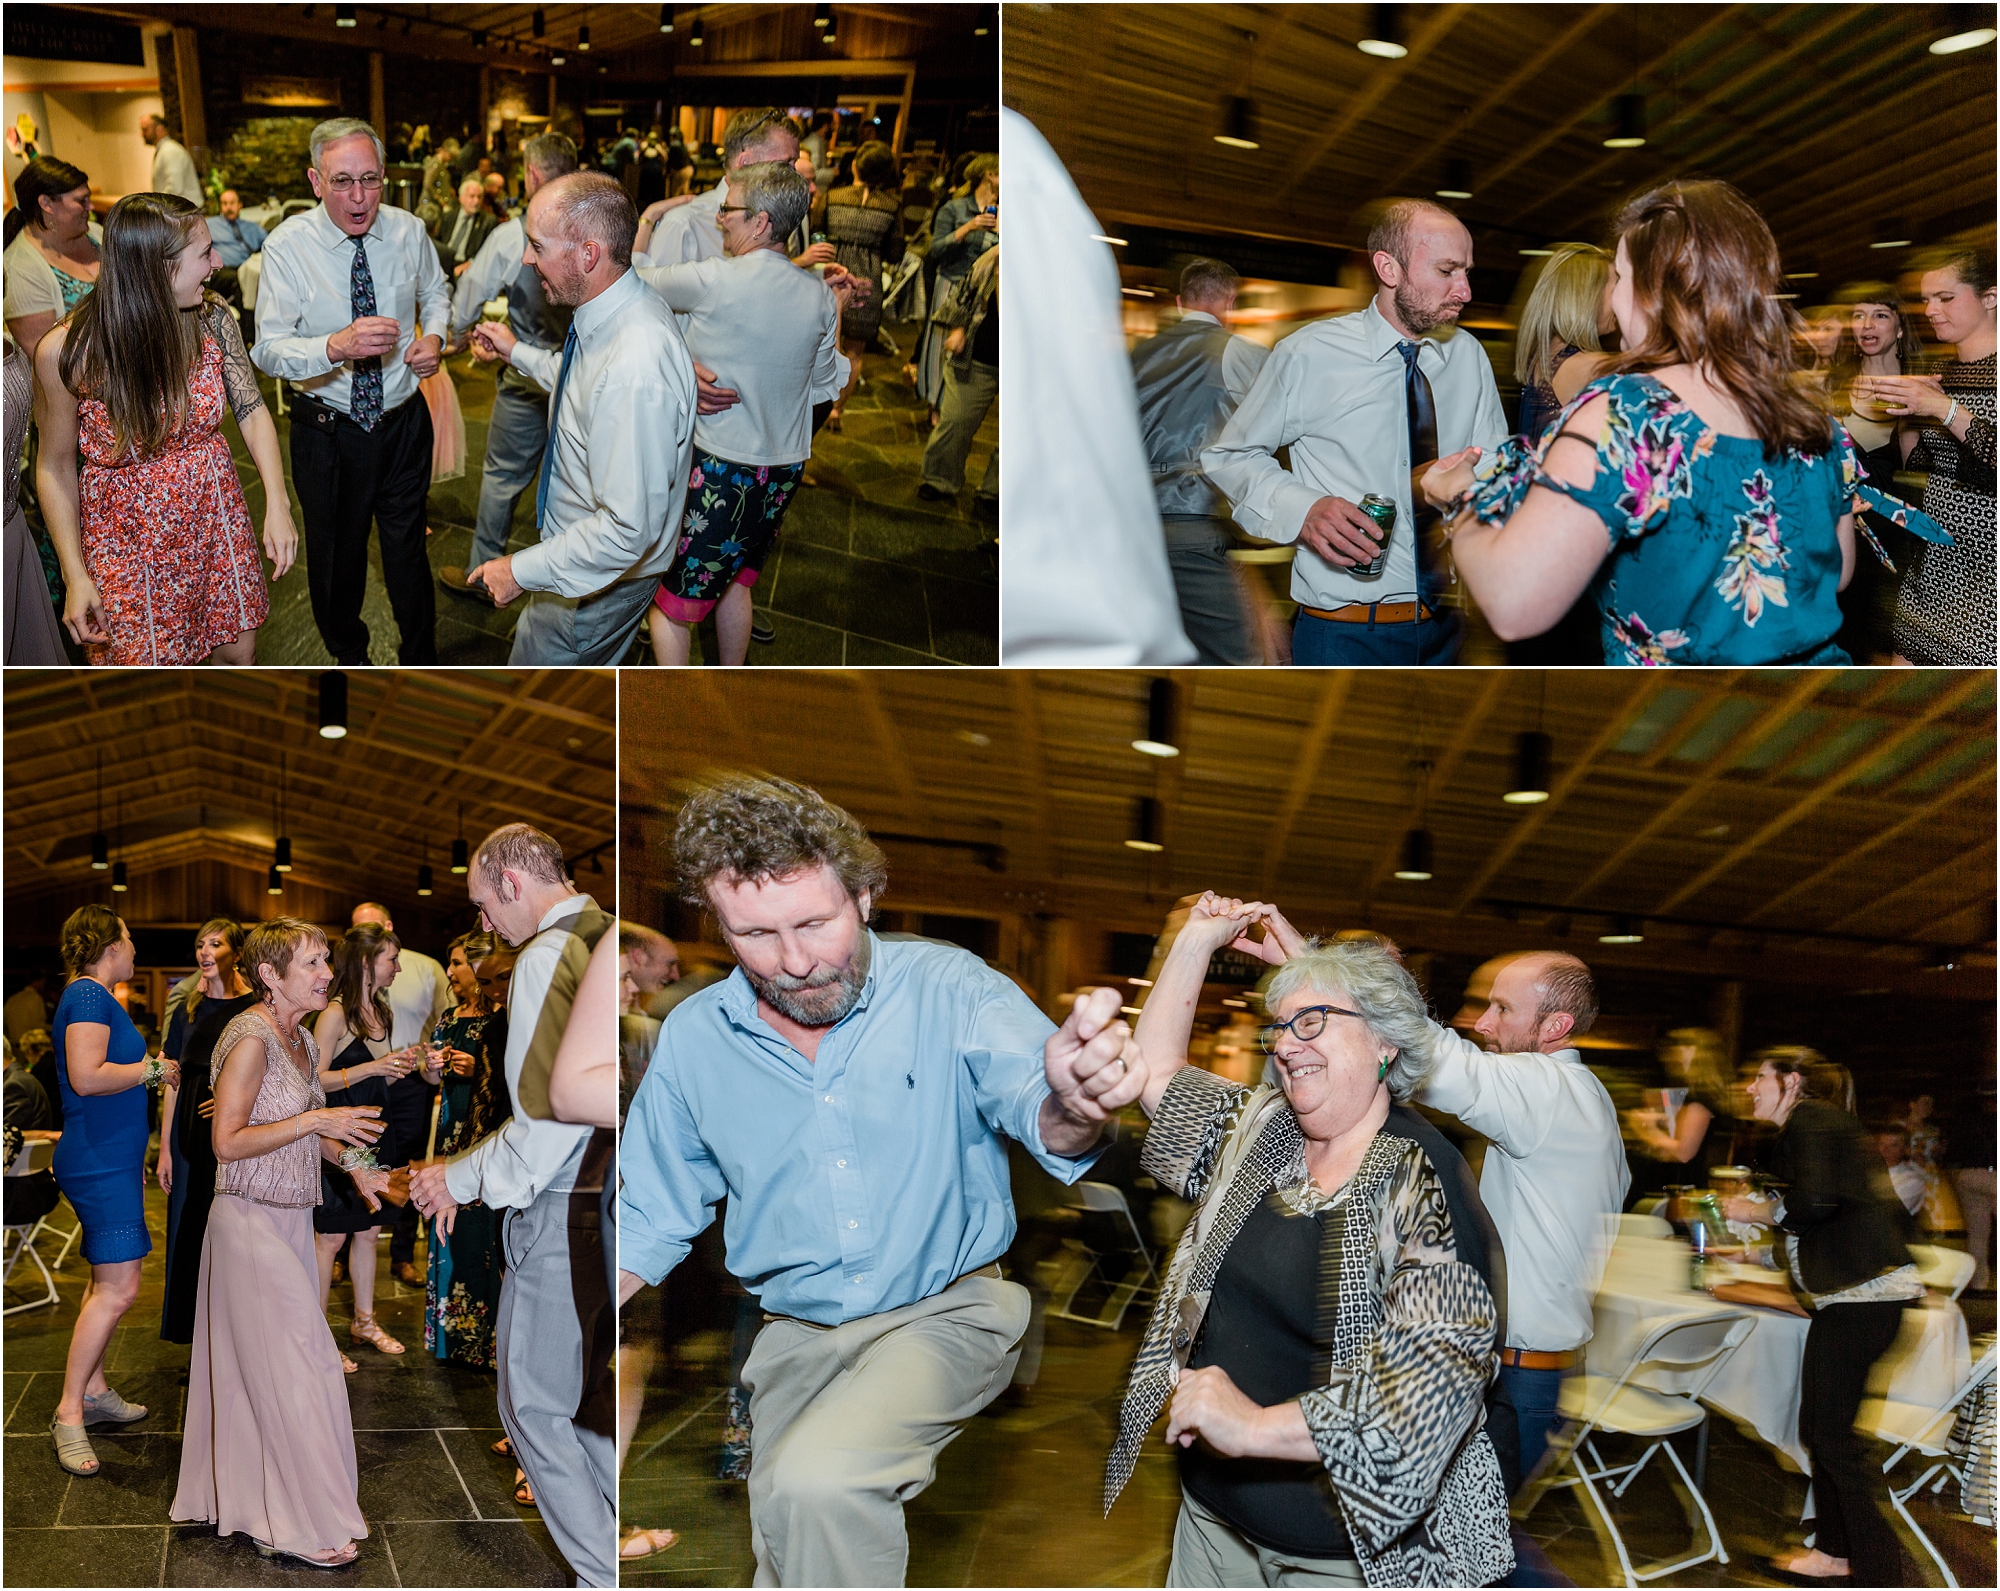 Wedding guests get down on the dance floor at this Bend, OR wedding at the High Desert Museum. | Erica Swantek Photography